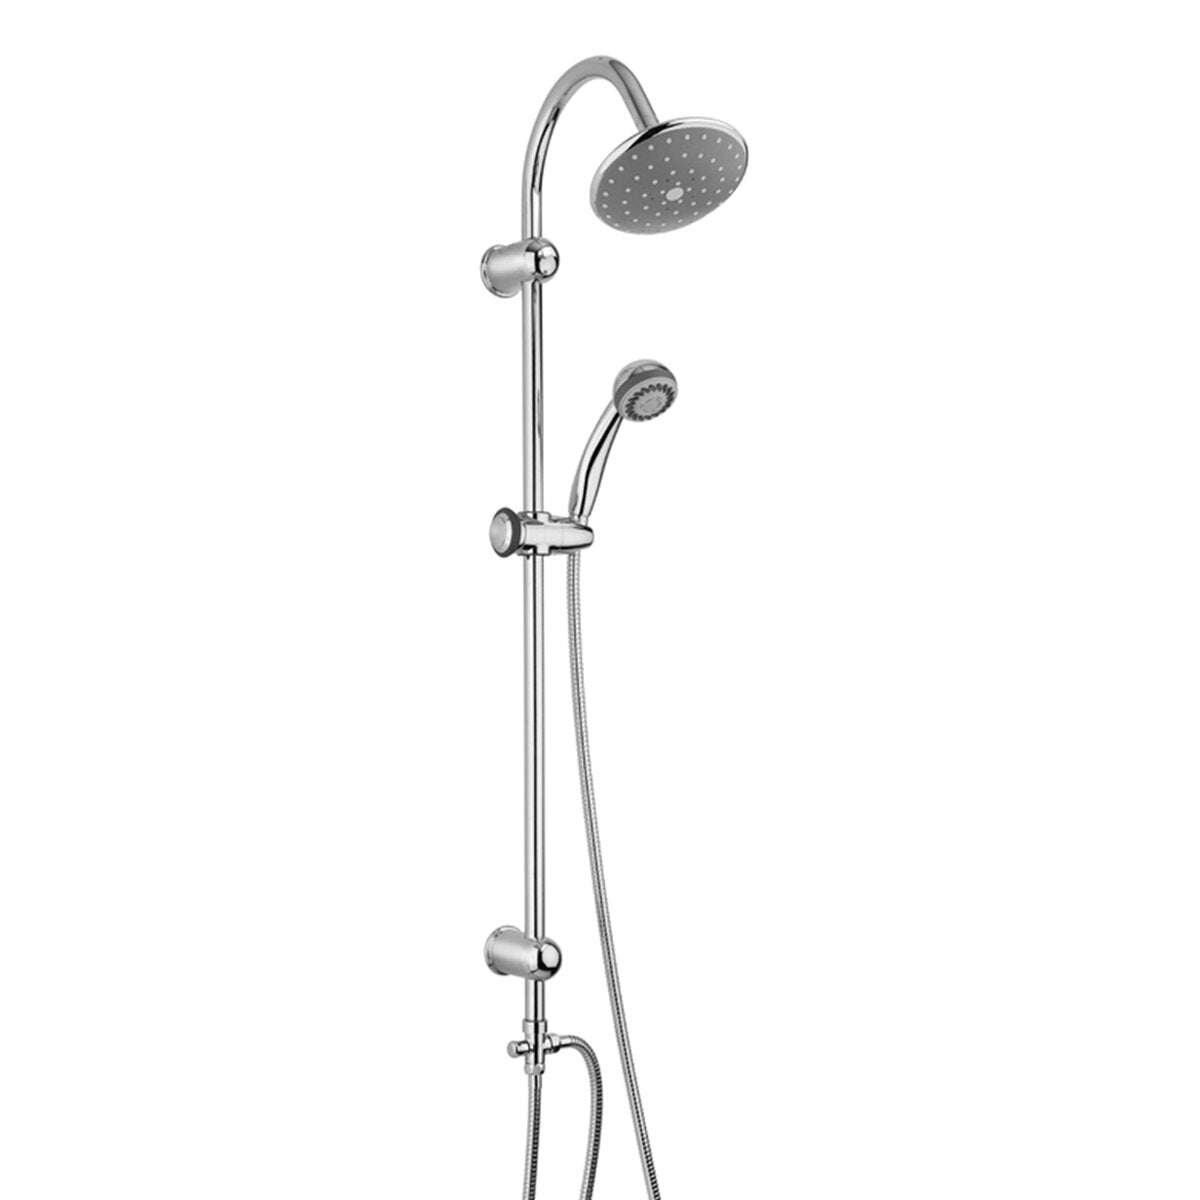 Piralla Zoe shower column adjustable to existing holes